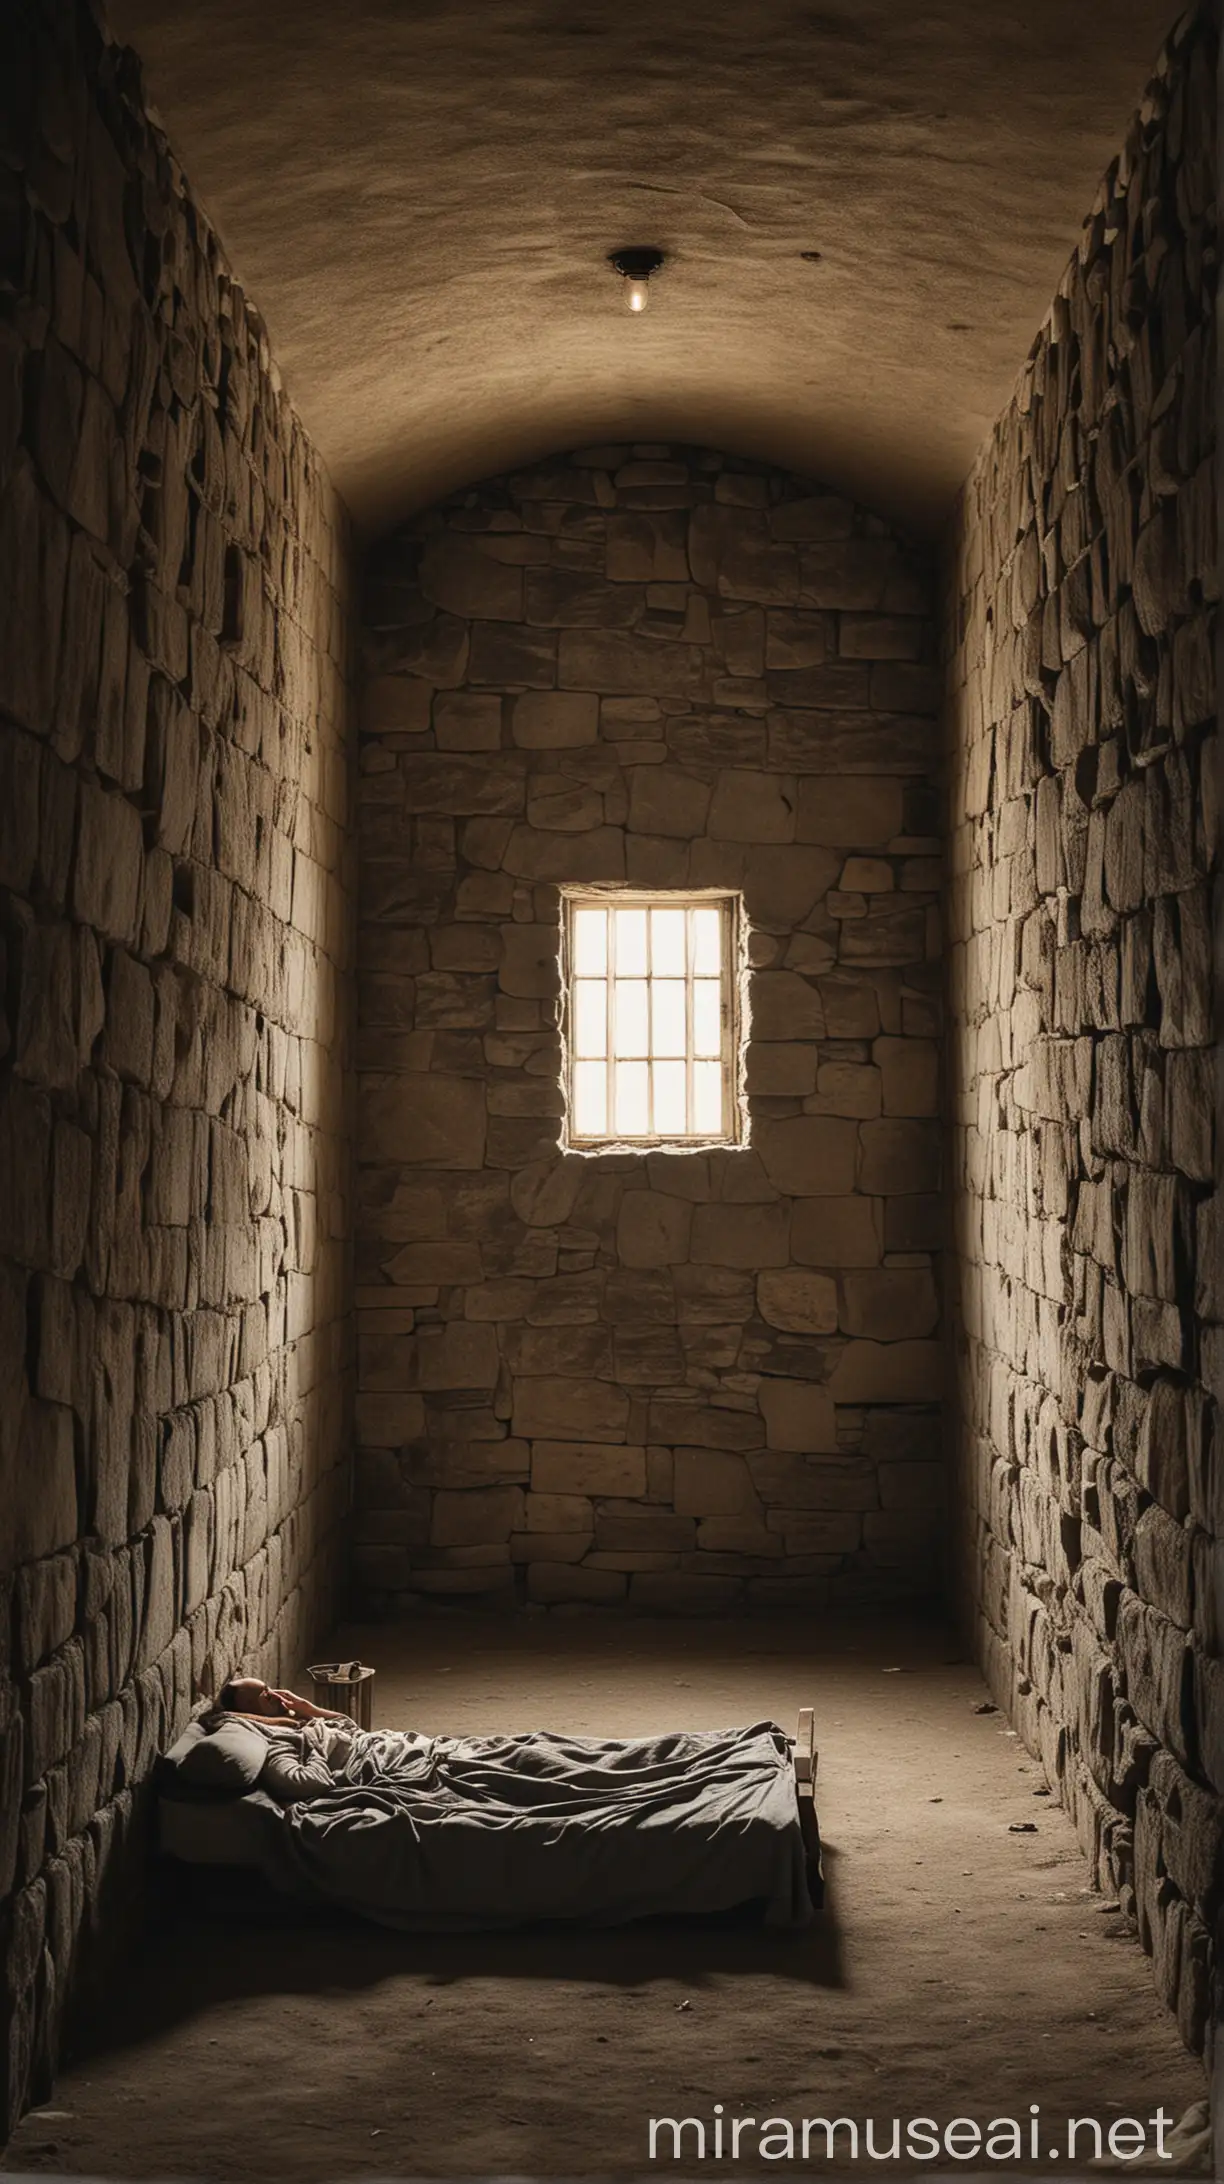 Lonely Prisoner Jeremiah in Dimly Lit Cell with Sparse Furnishings